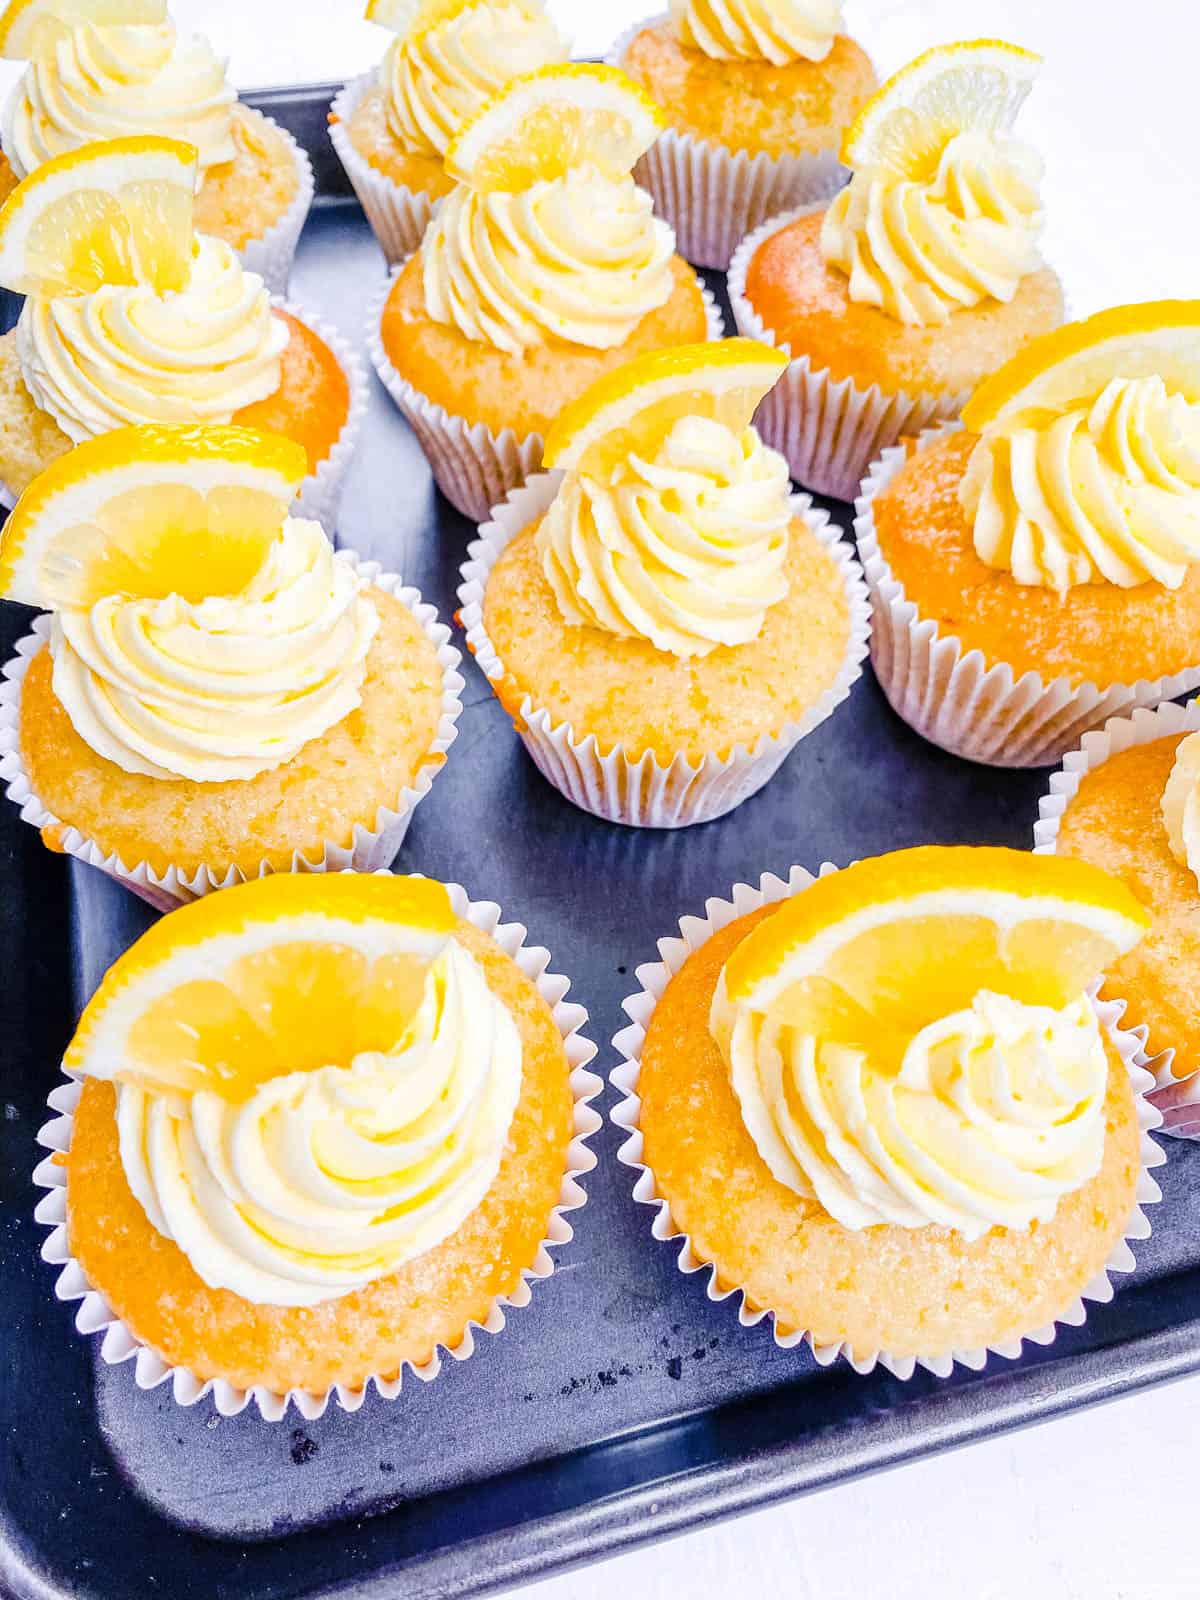 Vegan lemon cupcakes topped with vegan buttercream frosting and a lemon wedge on a baking sheet.